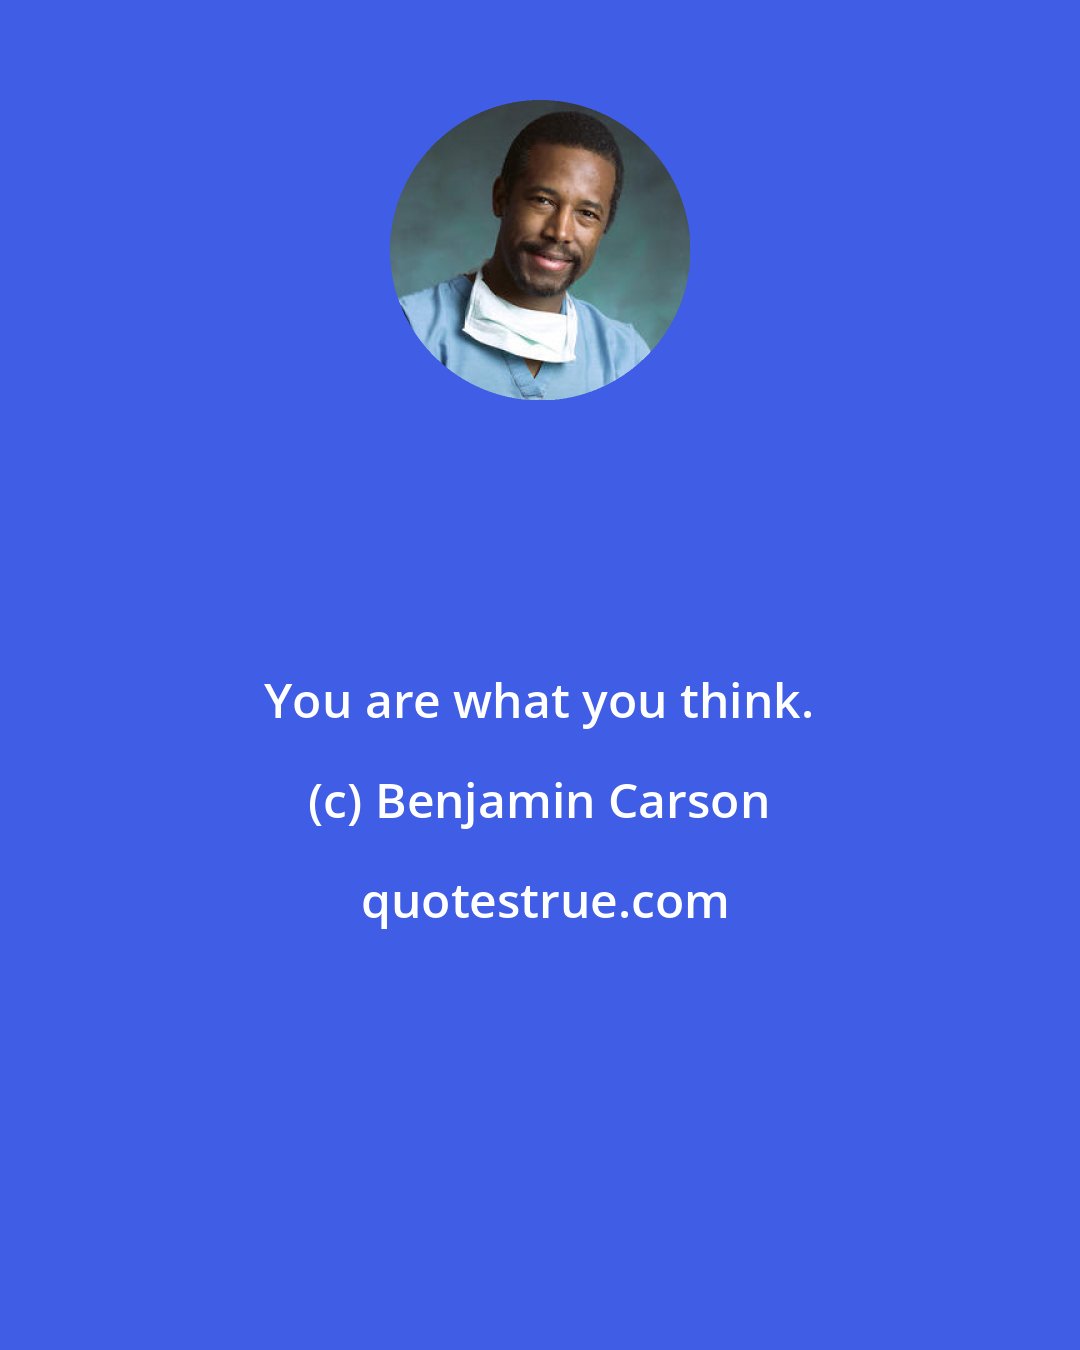 Benjamin Carson: You are what you think.